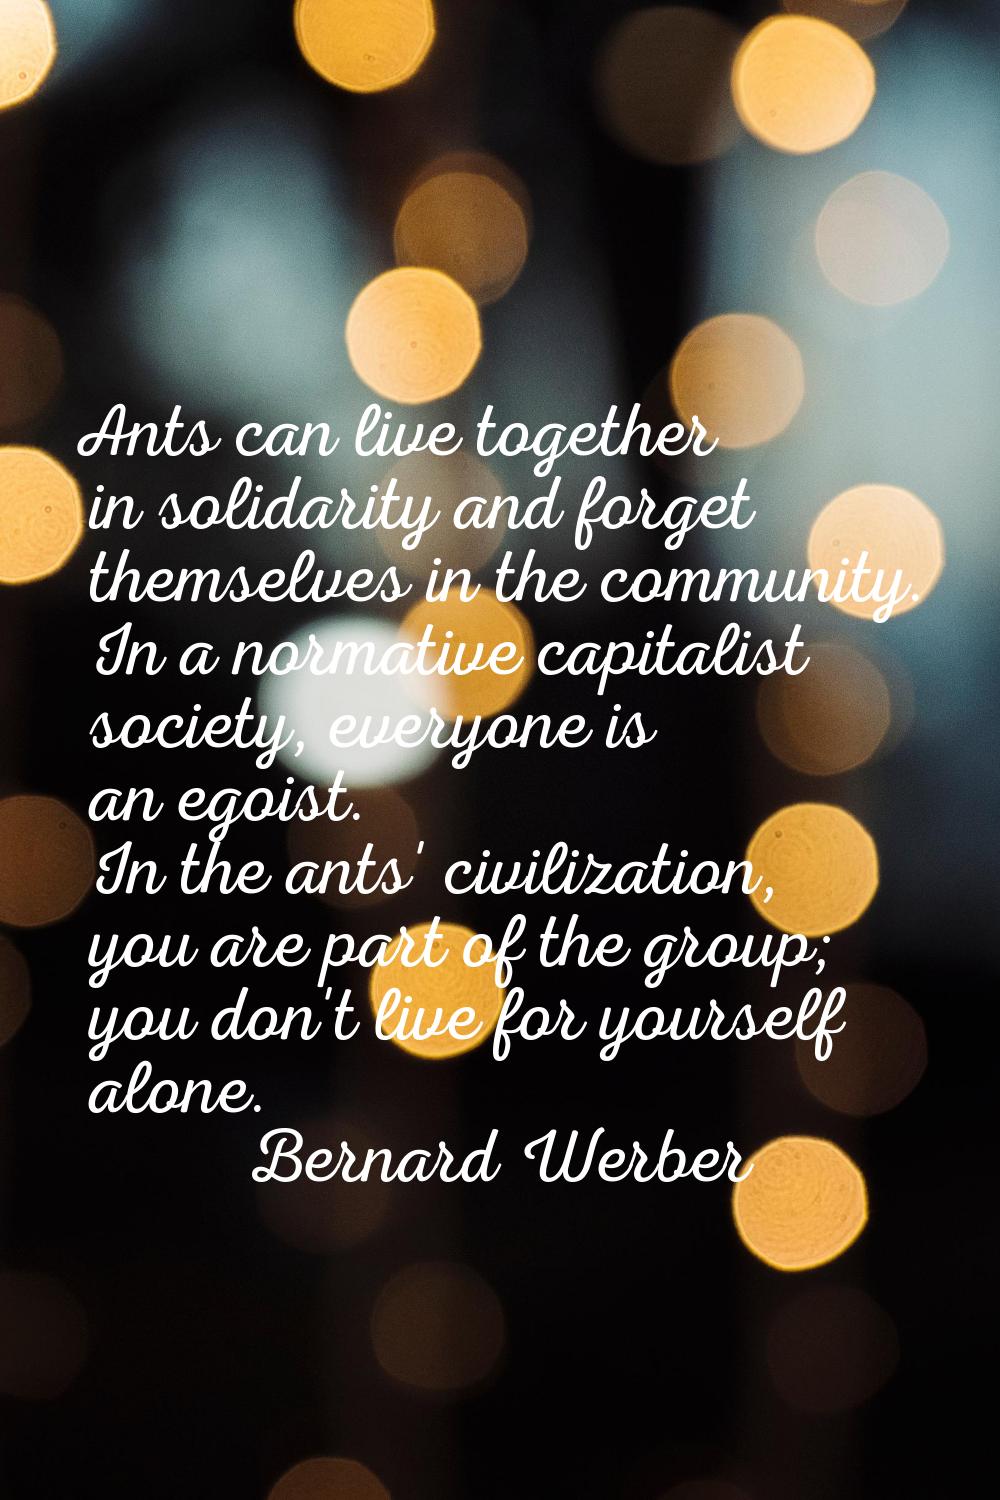 Ants can live together in solidarity and forget themselves in the community. In a normative capital